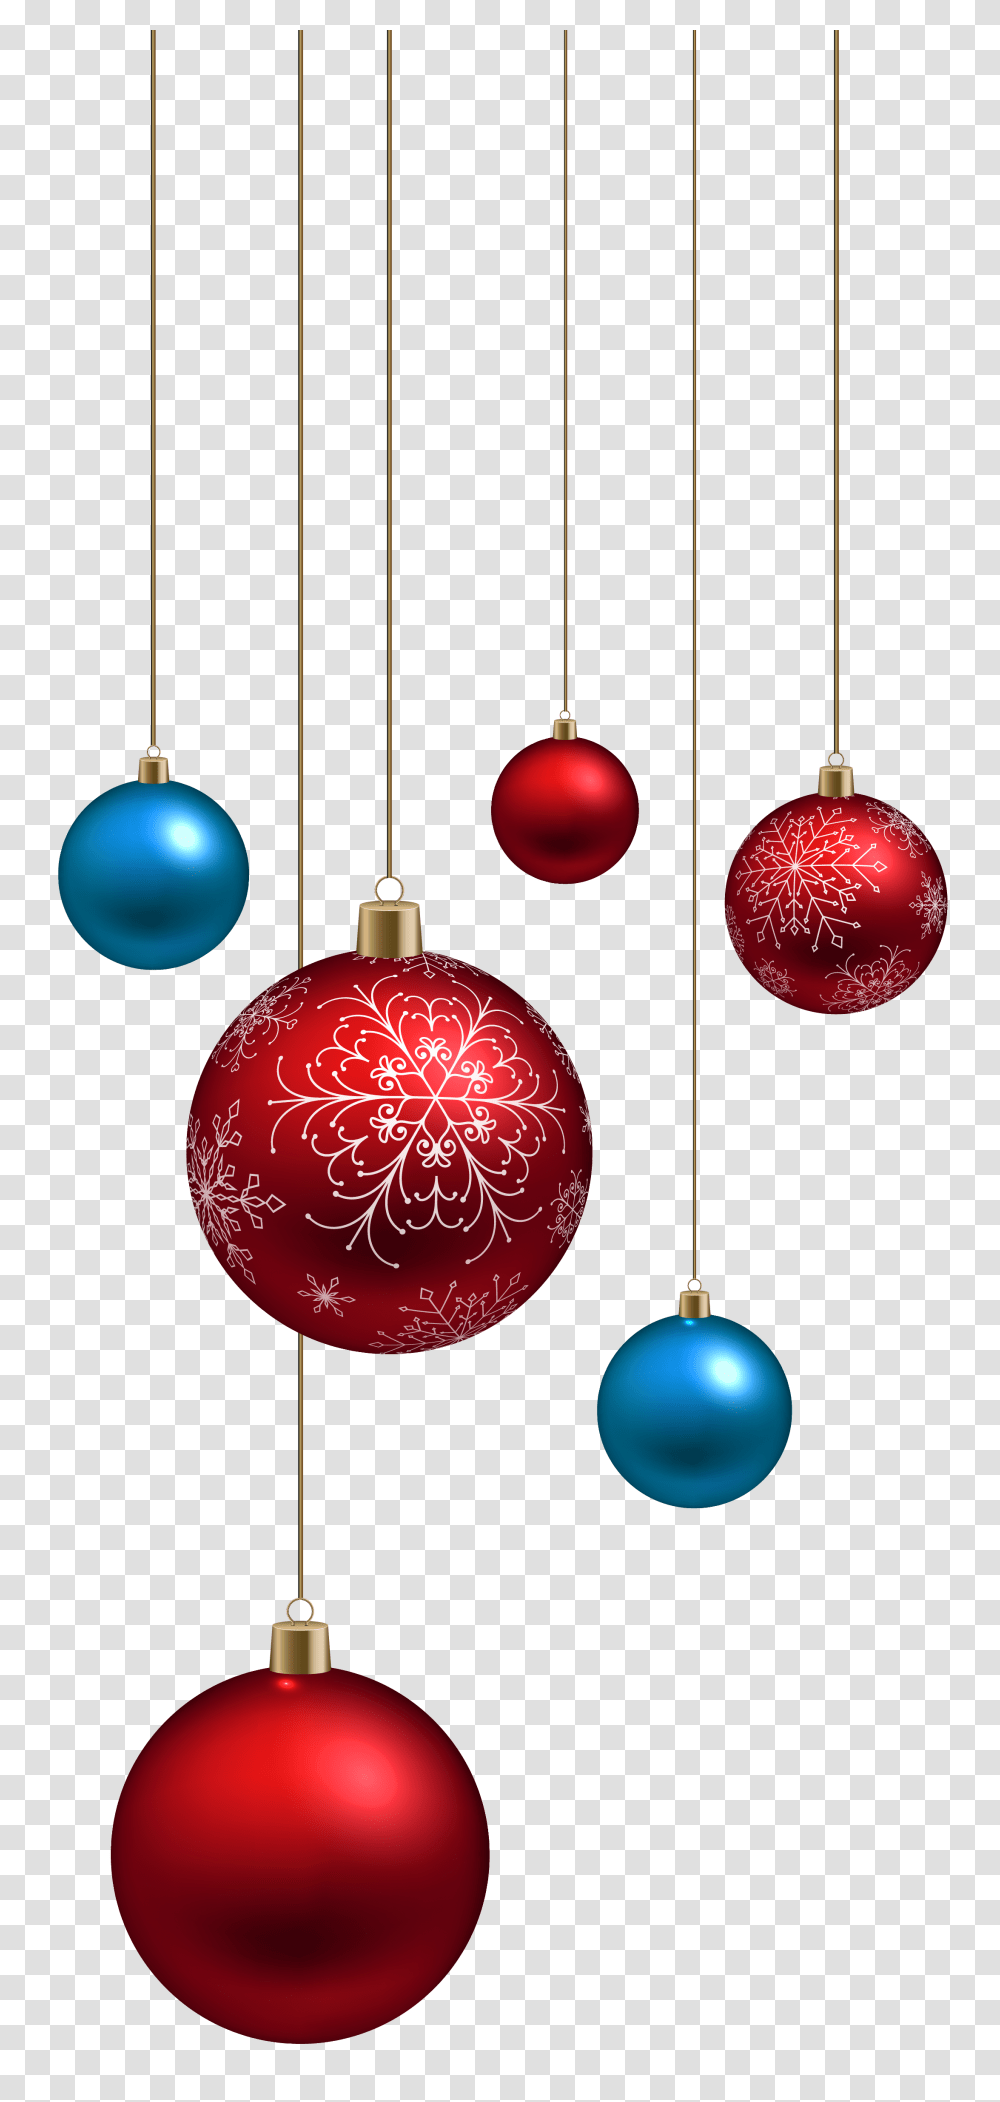 Download Hd Blue Glitter Christmas Ornaments Christmas Christmas Ball Ball Hanging Clipart, Lighting, Sphere, Pattern Transparent Png